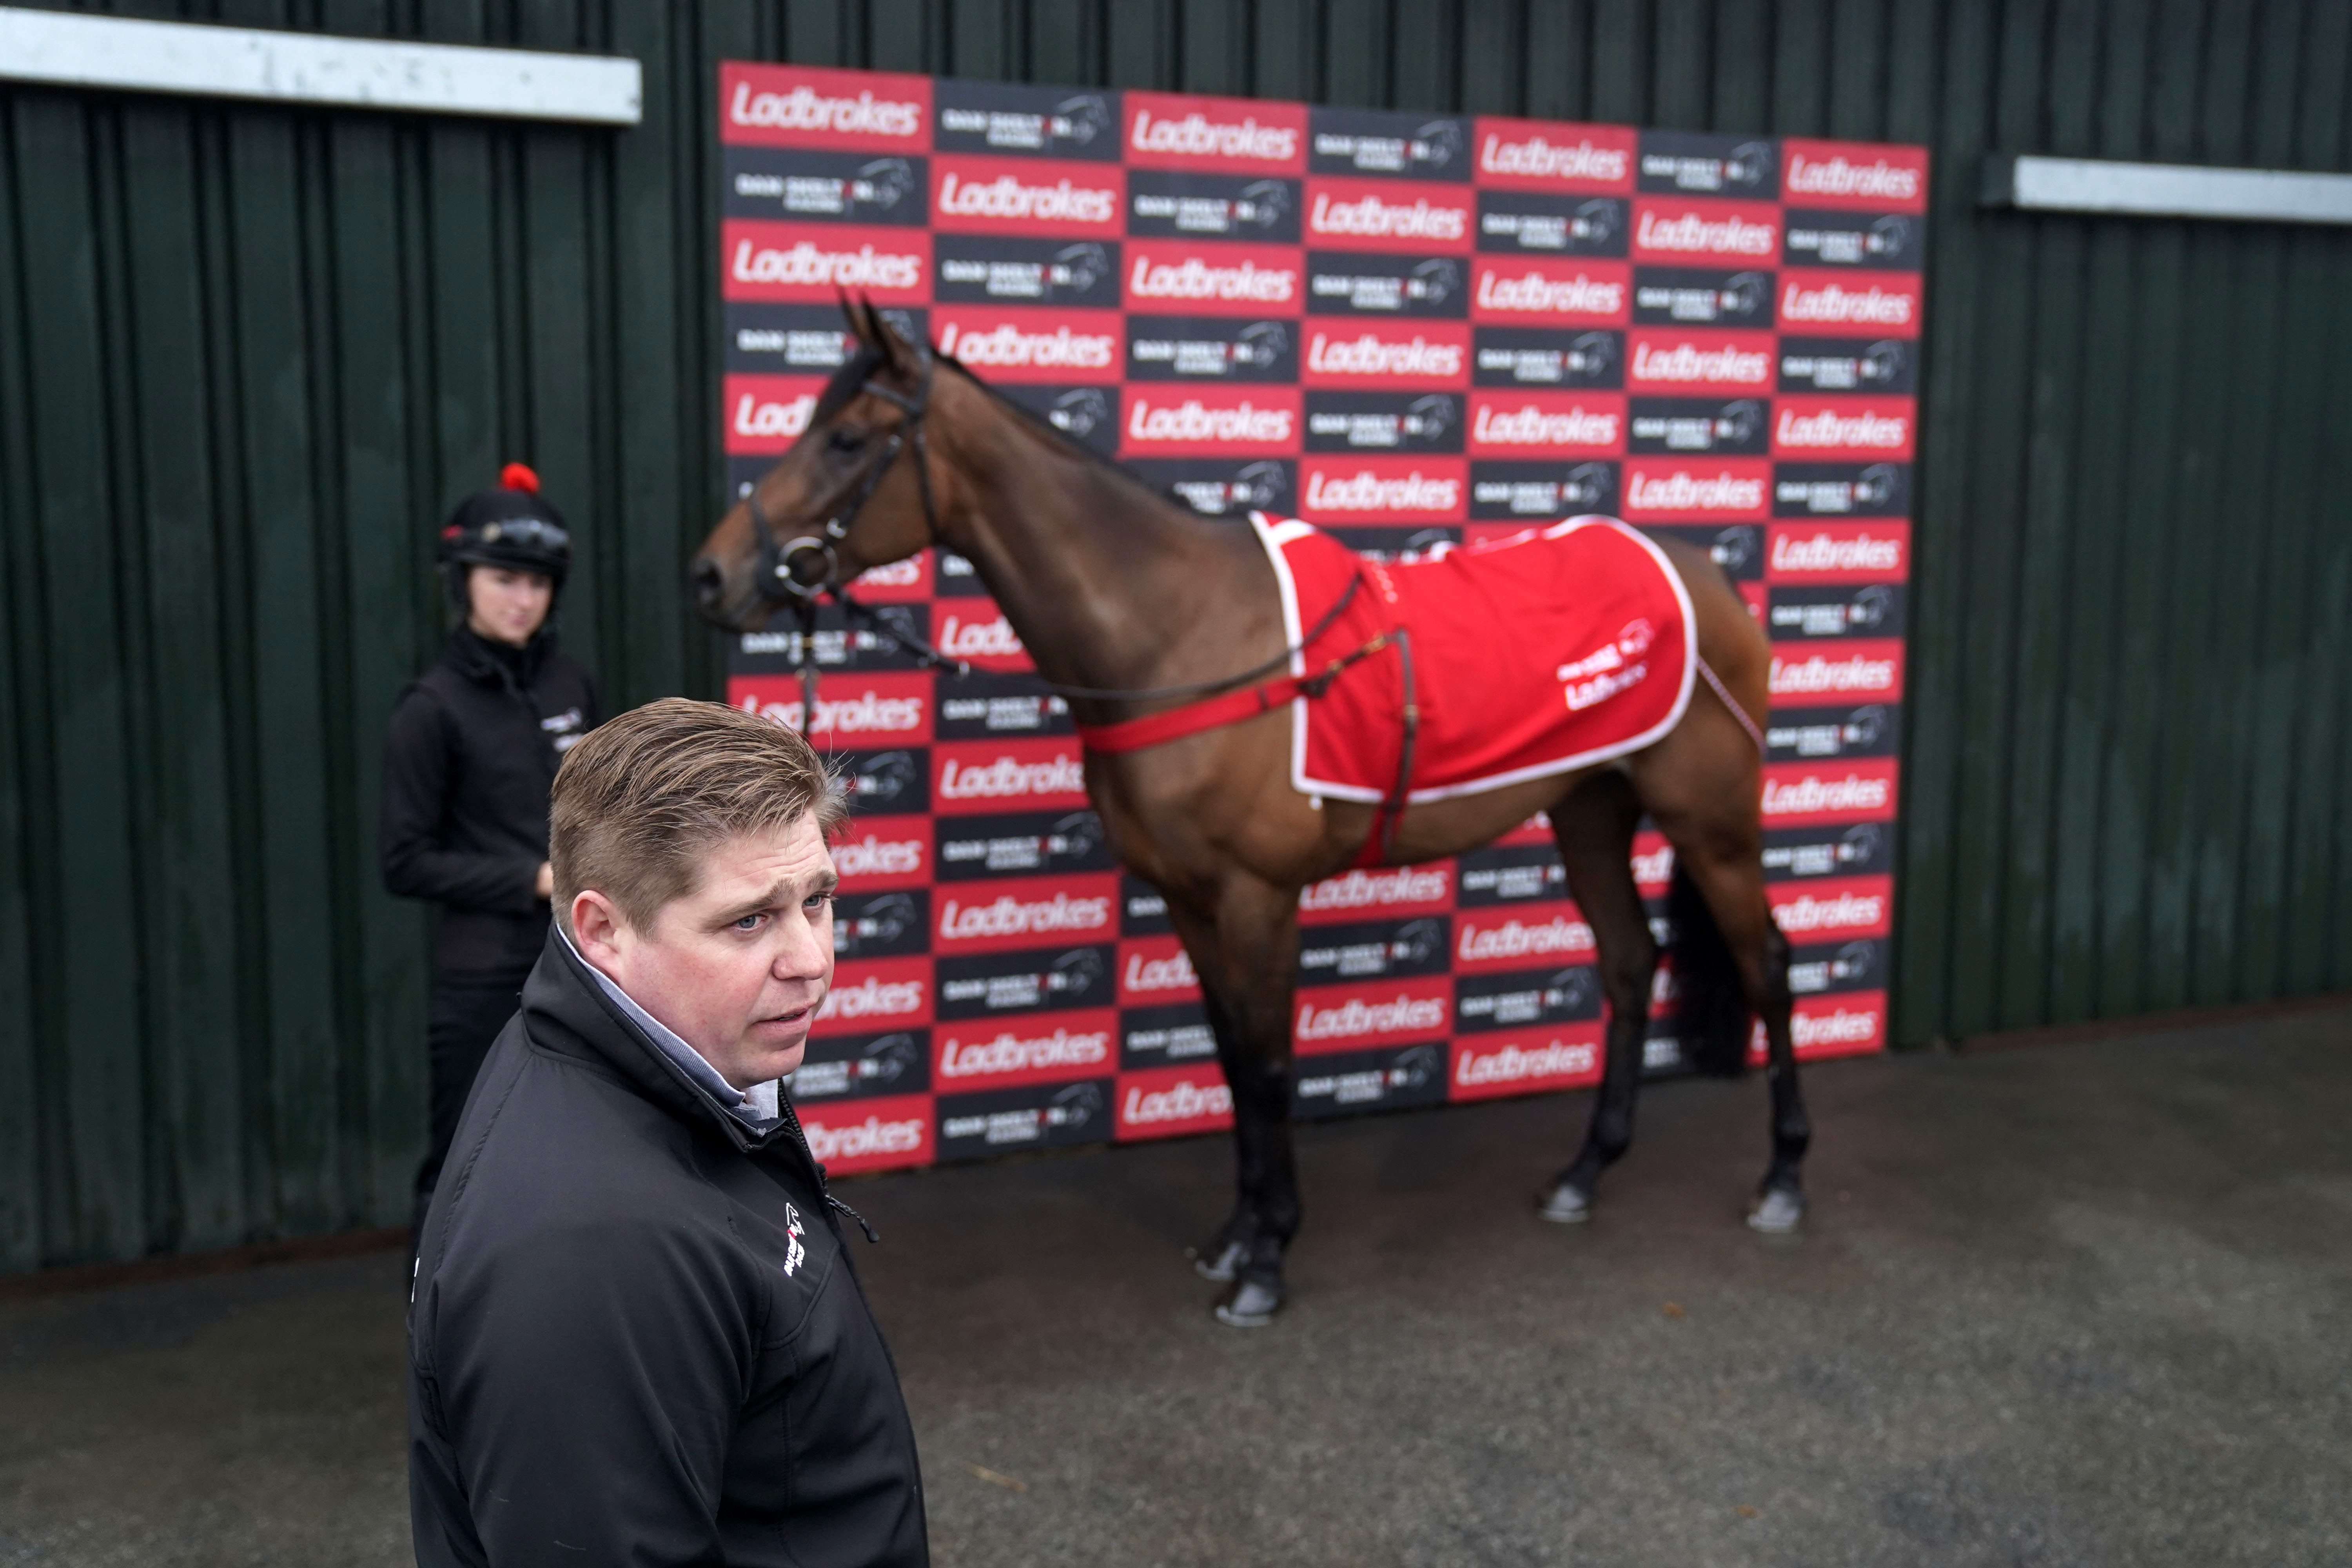 Dan Skelton feels the weight allowance could be key for Galia Des Liteaux